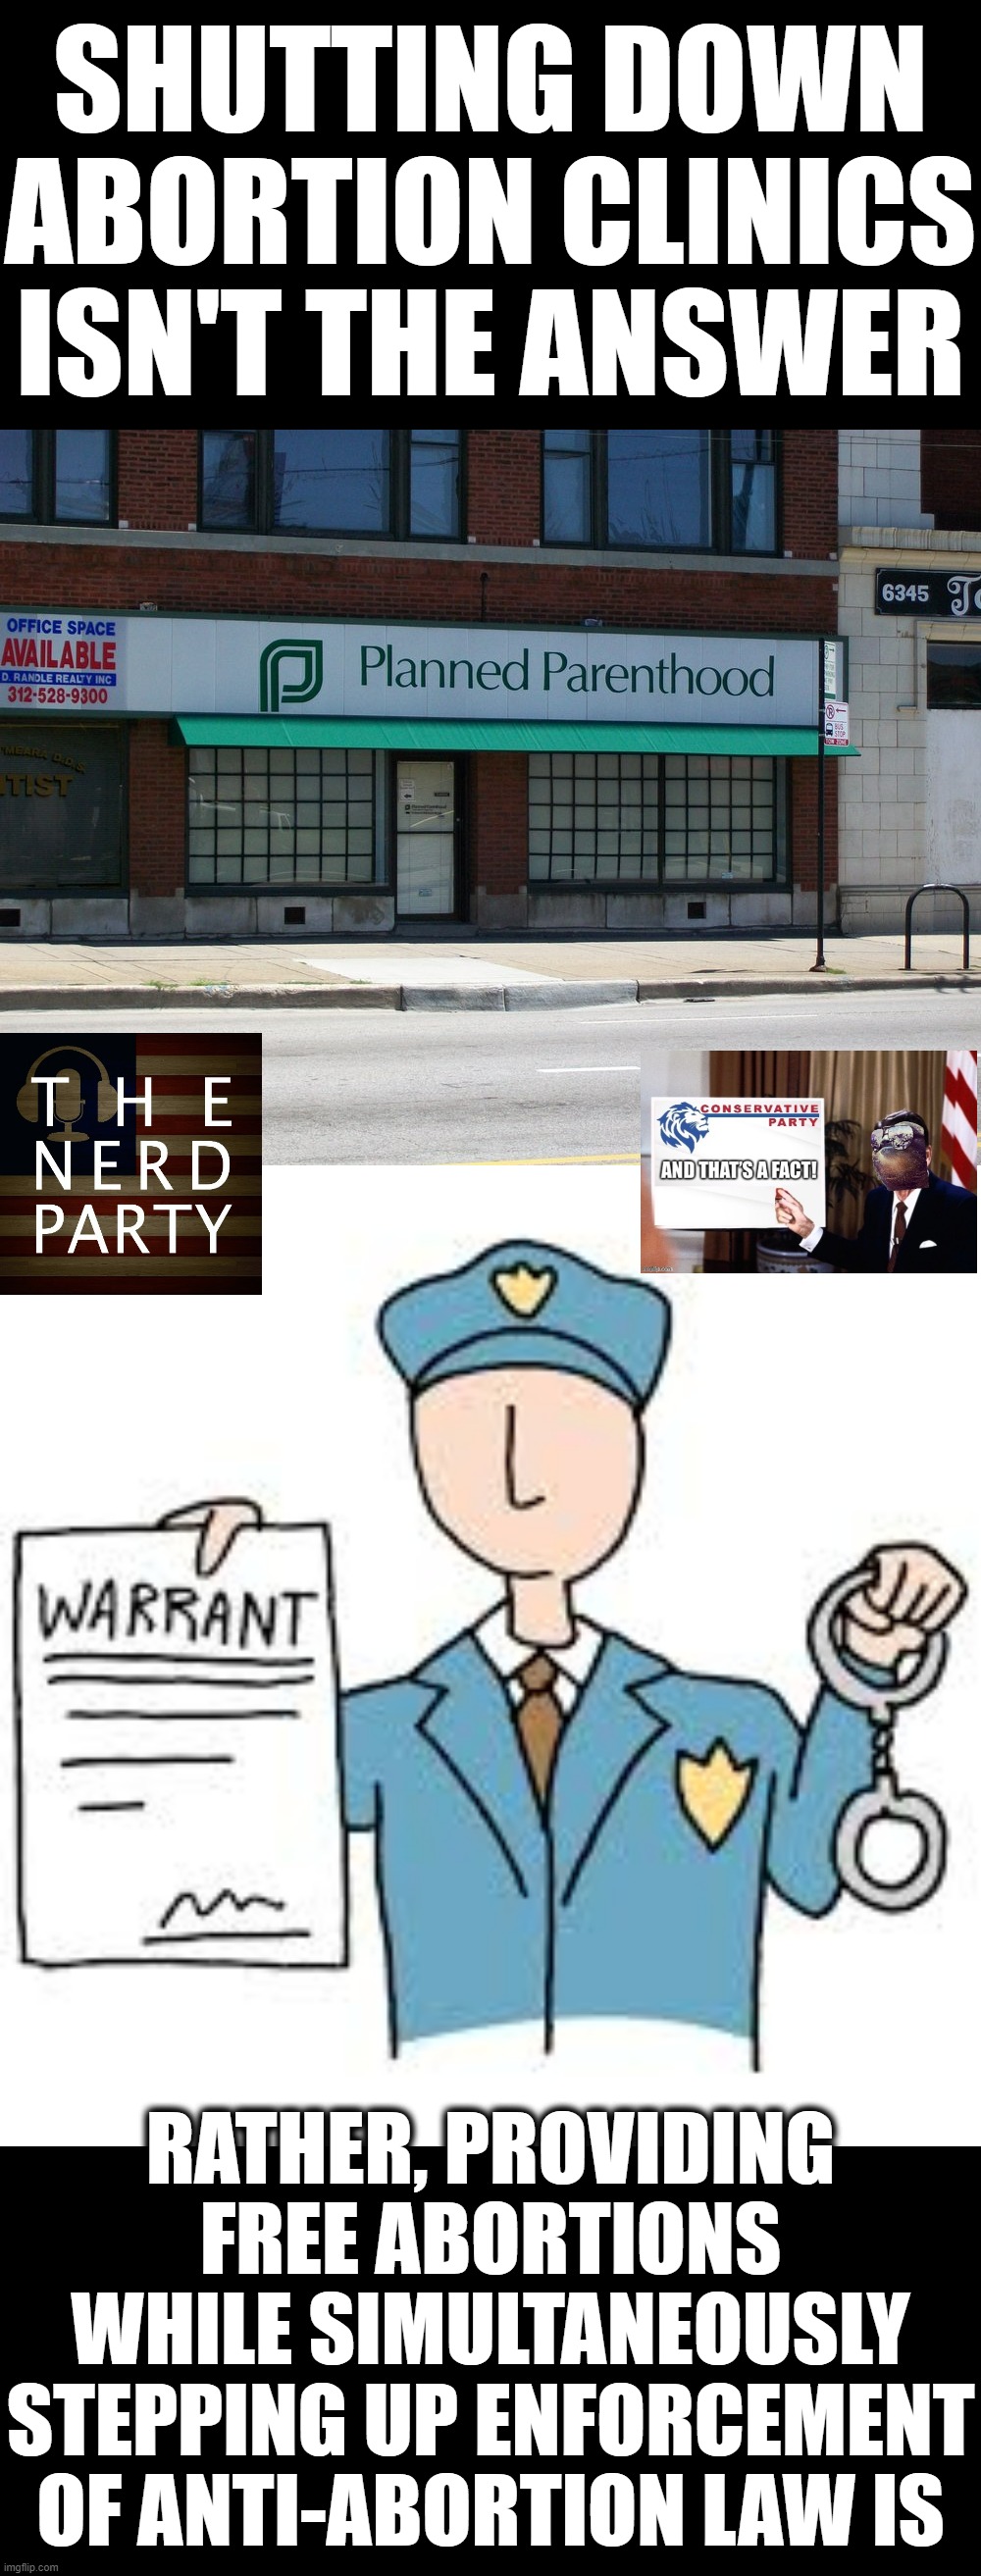 N.E.R.D. Party & Conservative Party have reached an acceptable compromise on the abortion issue: Free access + instant jail. | SHUTTING DOWN ABORTION CLINICS ISN'T THE ANSWER; RATHER, PROVIDING FREE ABORTIONS WHILE SIMULTANEOUSLY STEPPING UP ENFORCEMENT OF ANTI-ABORTION LAW IS | image tagged in planned parenthood,arrest warrant,abortion,pro-choice,pro-life | made w/ Imgflip meme maker